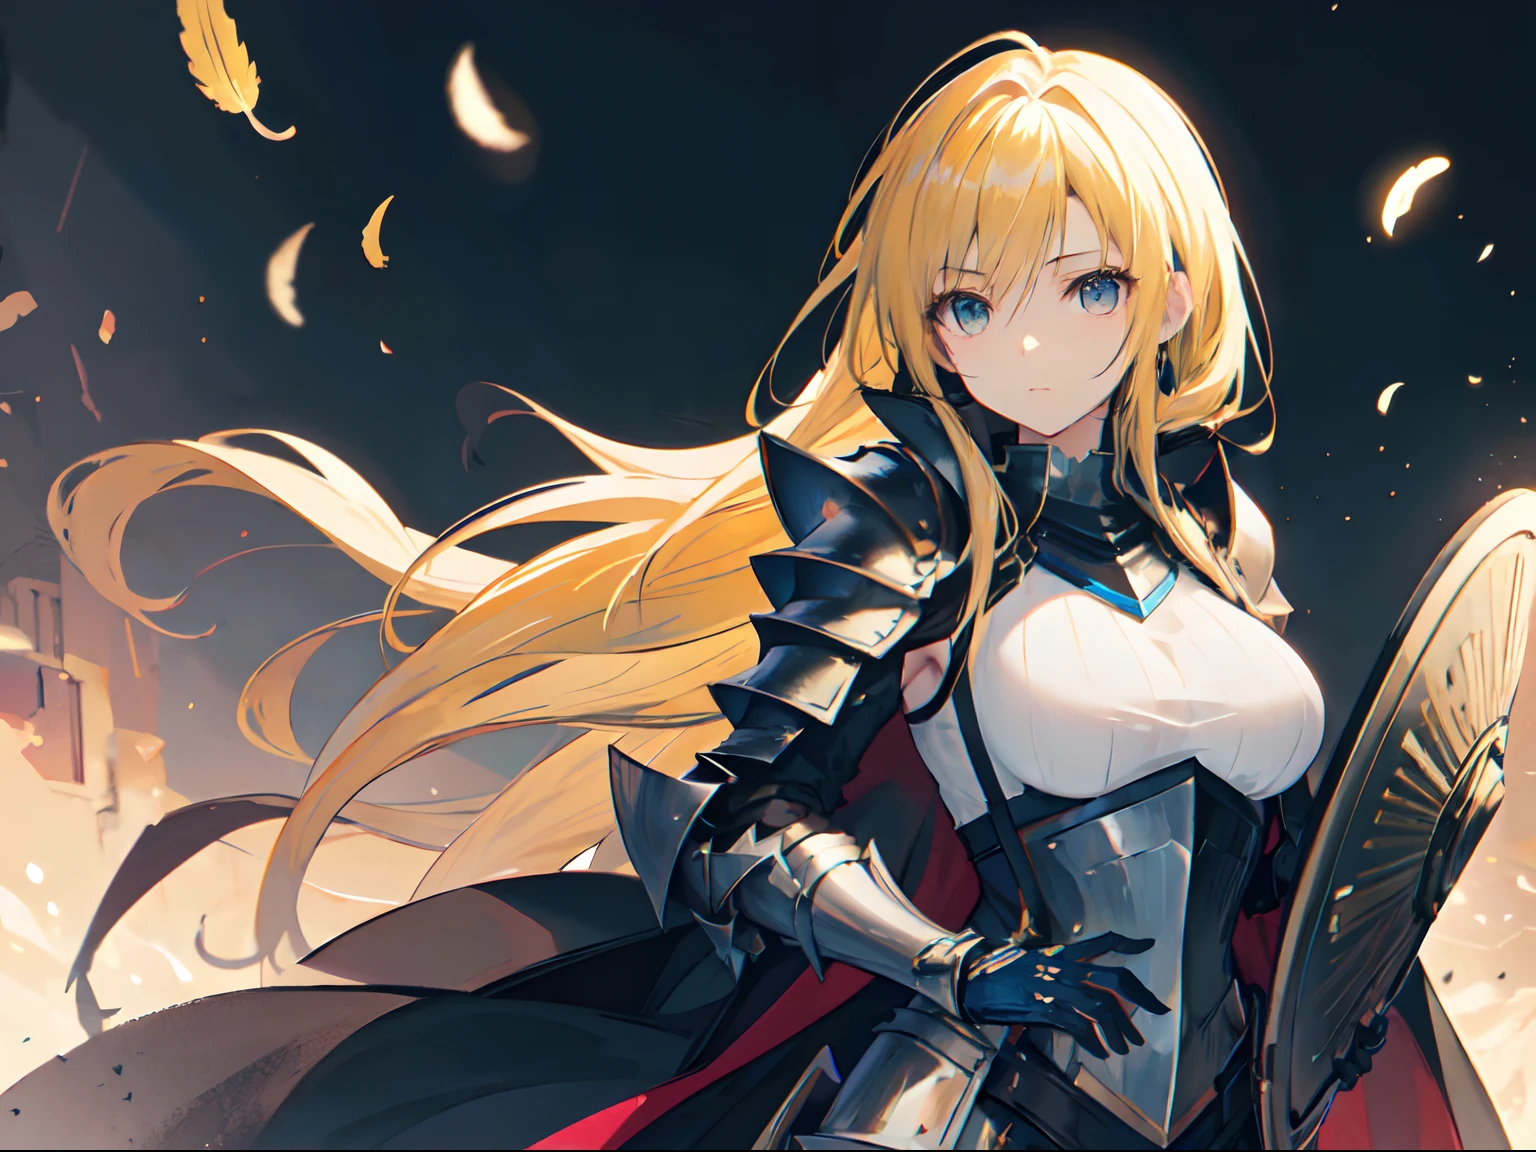 "Anime-style illustration of a beautiful girl with yellow hair and blue eyes wearing full plate valkyrie armor. The armor, shield, and lance are adorned with golden strip black accents. She wears a black robe like feathers."beautiful female knight, arknights, girl in knight armor